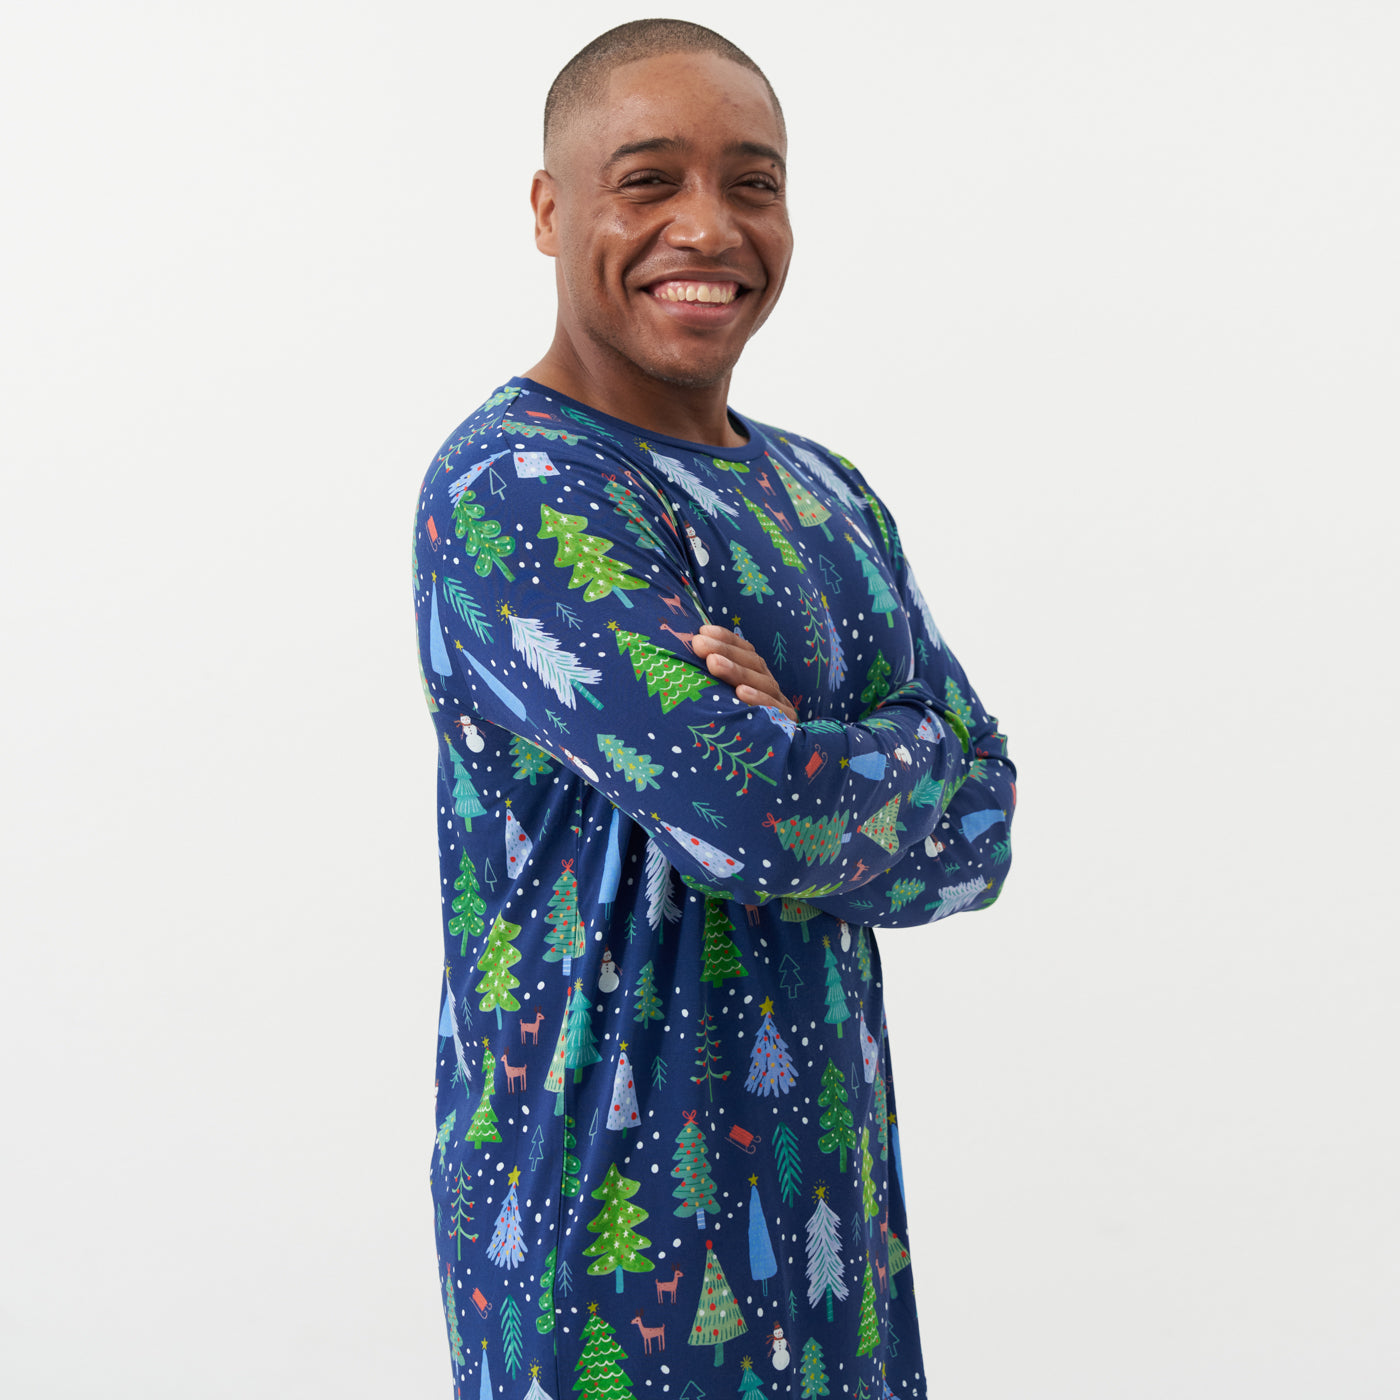 Profile image of a man posing wearing Blue Merry and Bright men's pajama top